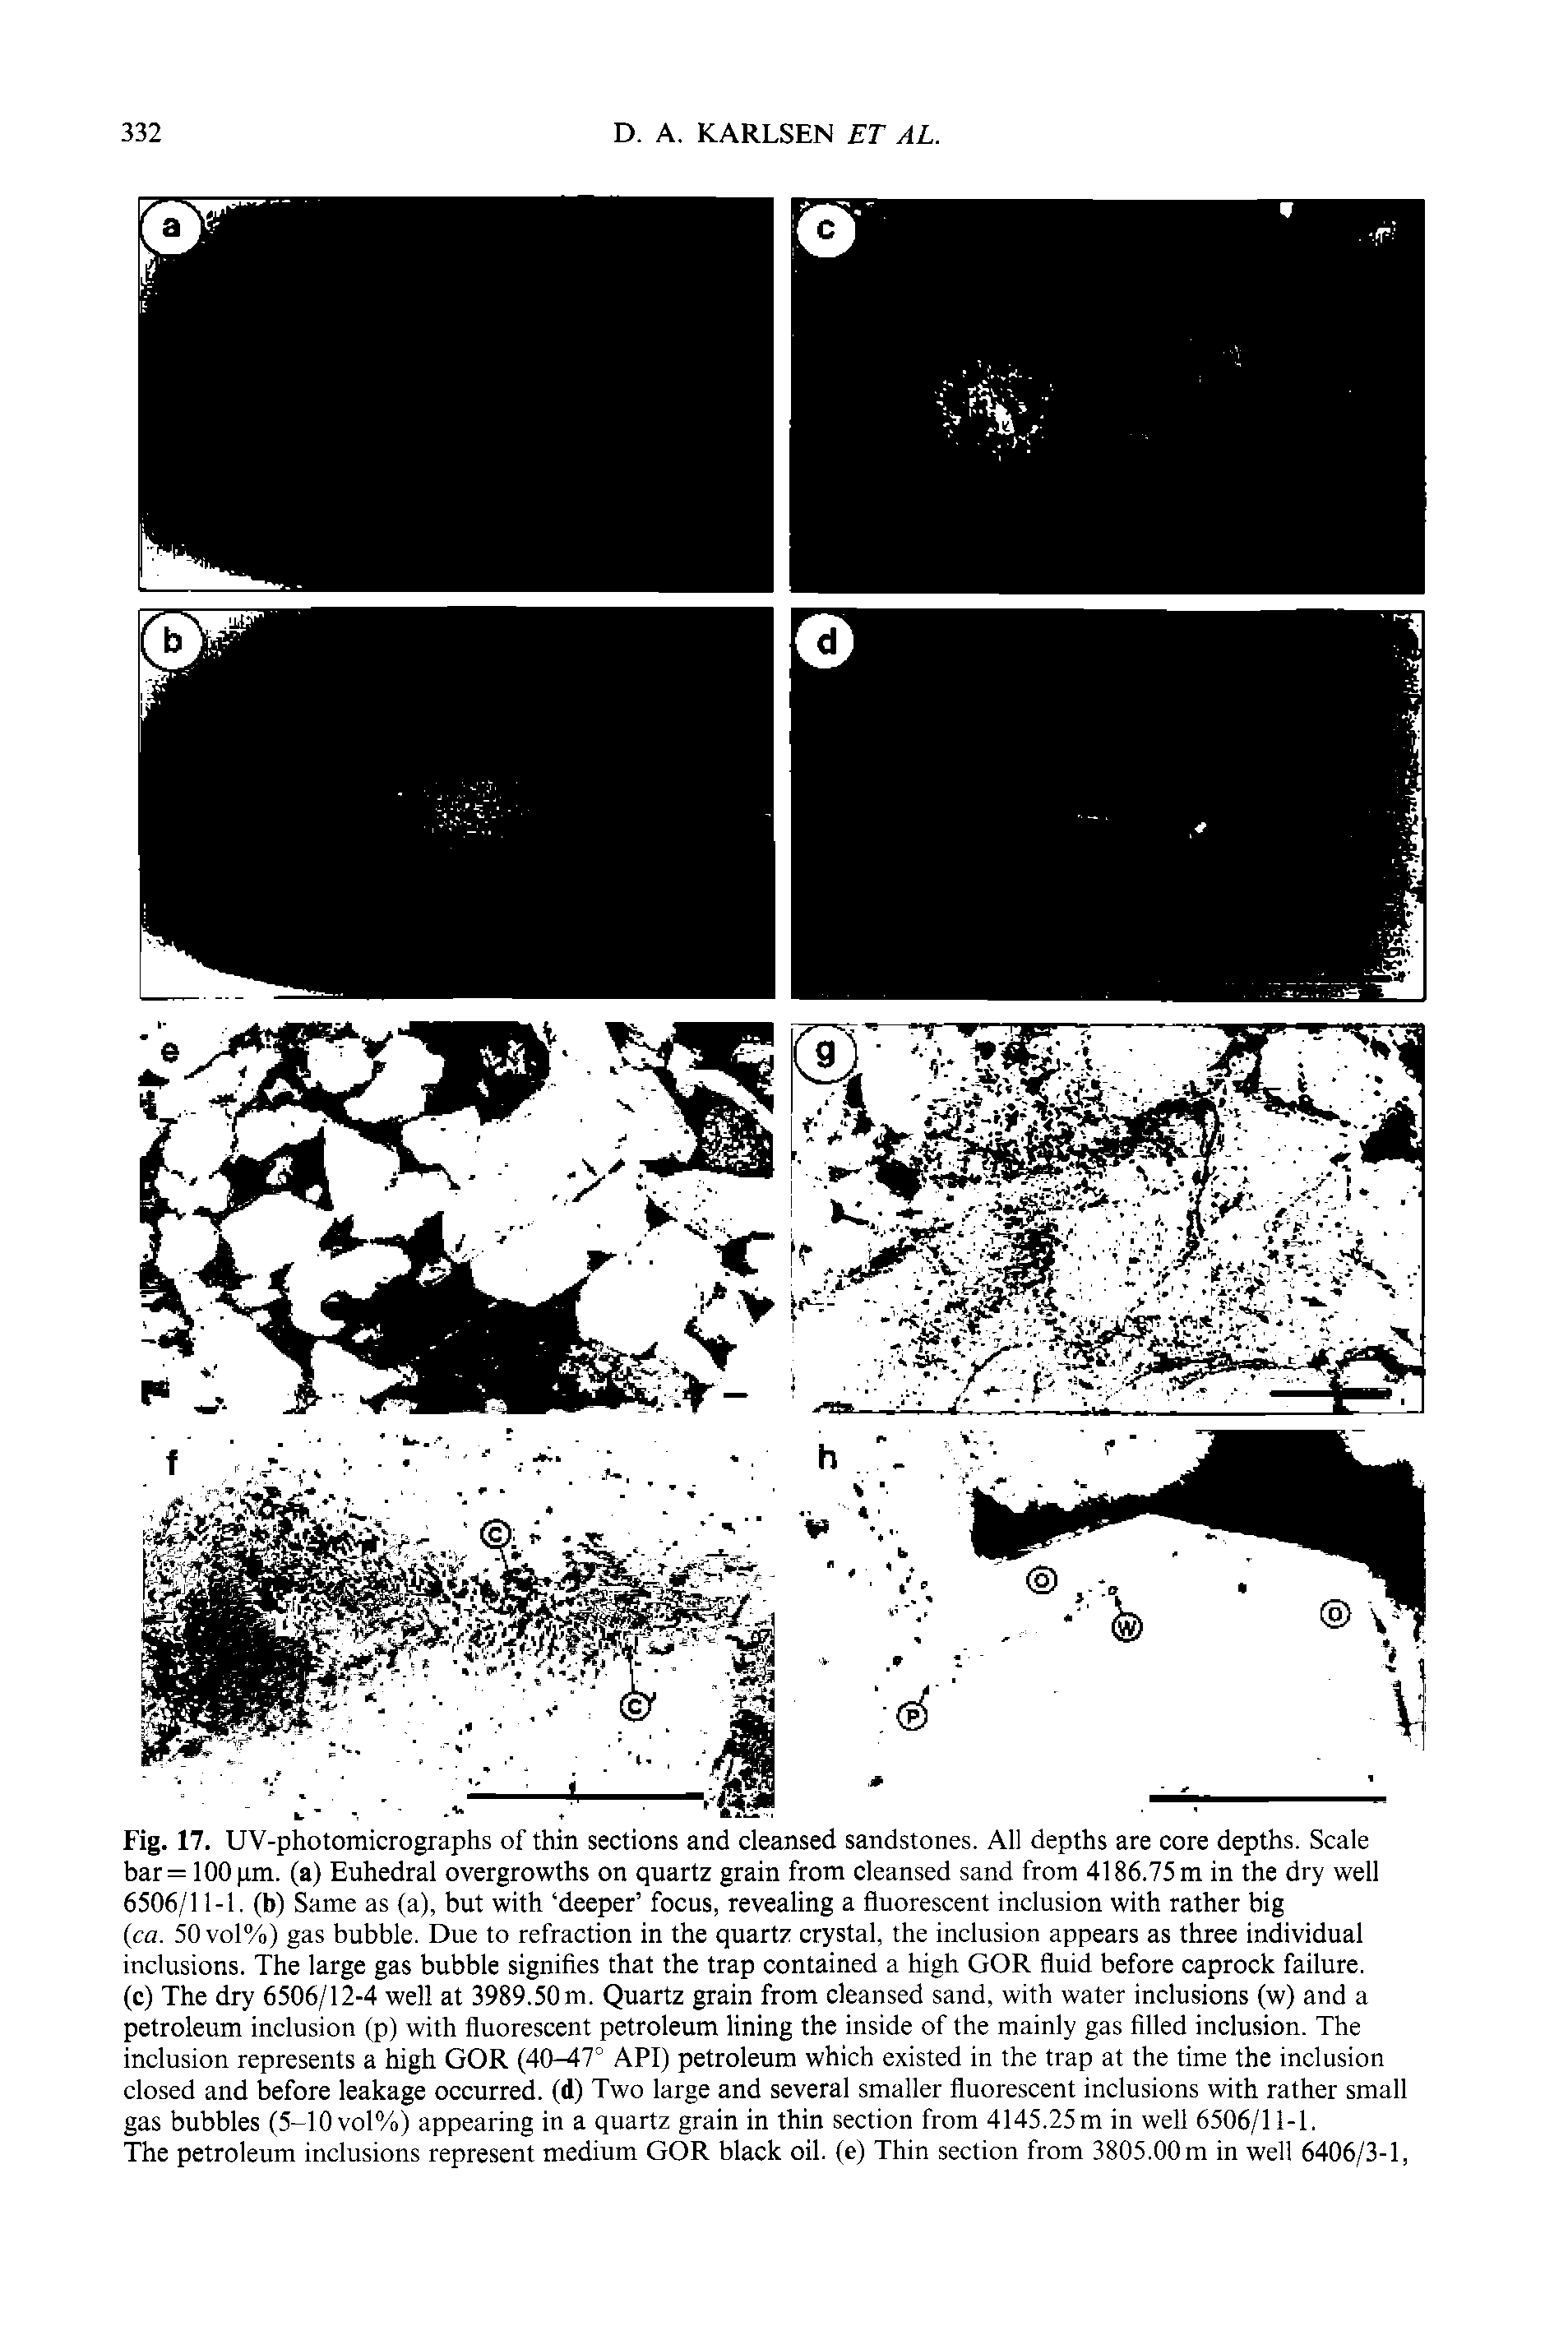 Fig. 17. UV-photomicrographs of thin sections and cleansed sandstones. All depths are core depths. Scale bar = 100 pm. (a) Euhedral overgrowths on quartz grain from cleansed sand from 4186.75 m in the dry well 6506/11-1. (b) Same as (a), but with deeper focus, revealing a fluorescent inclusion with rather big ca. 50 vol%) gas bubble. Due to refraction in the quartz crystal, the inclusion appears as three individual inclusions. The large gas bubble signifies that the trap contained a high GOR fluid before caprock failure.